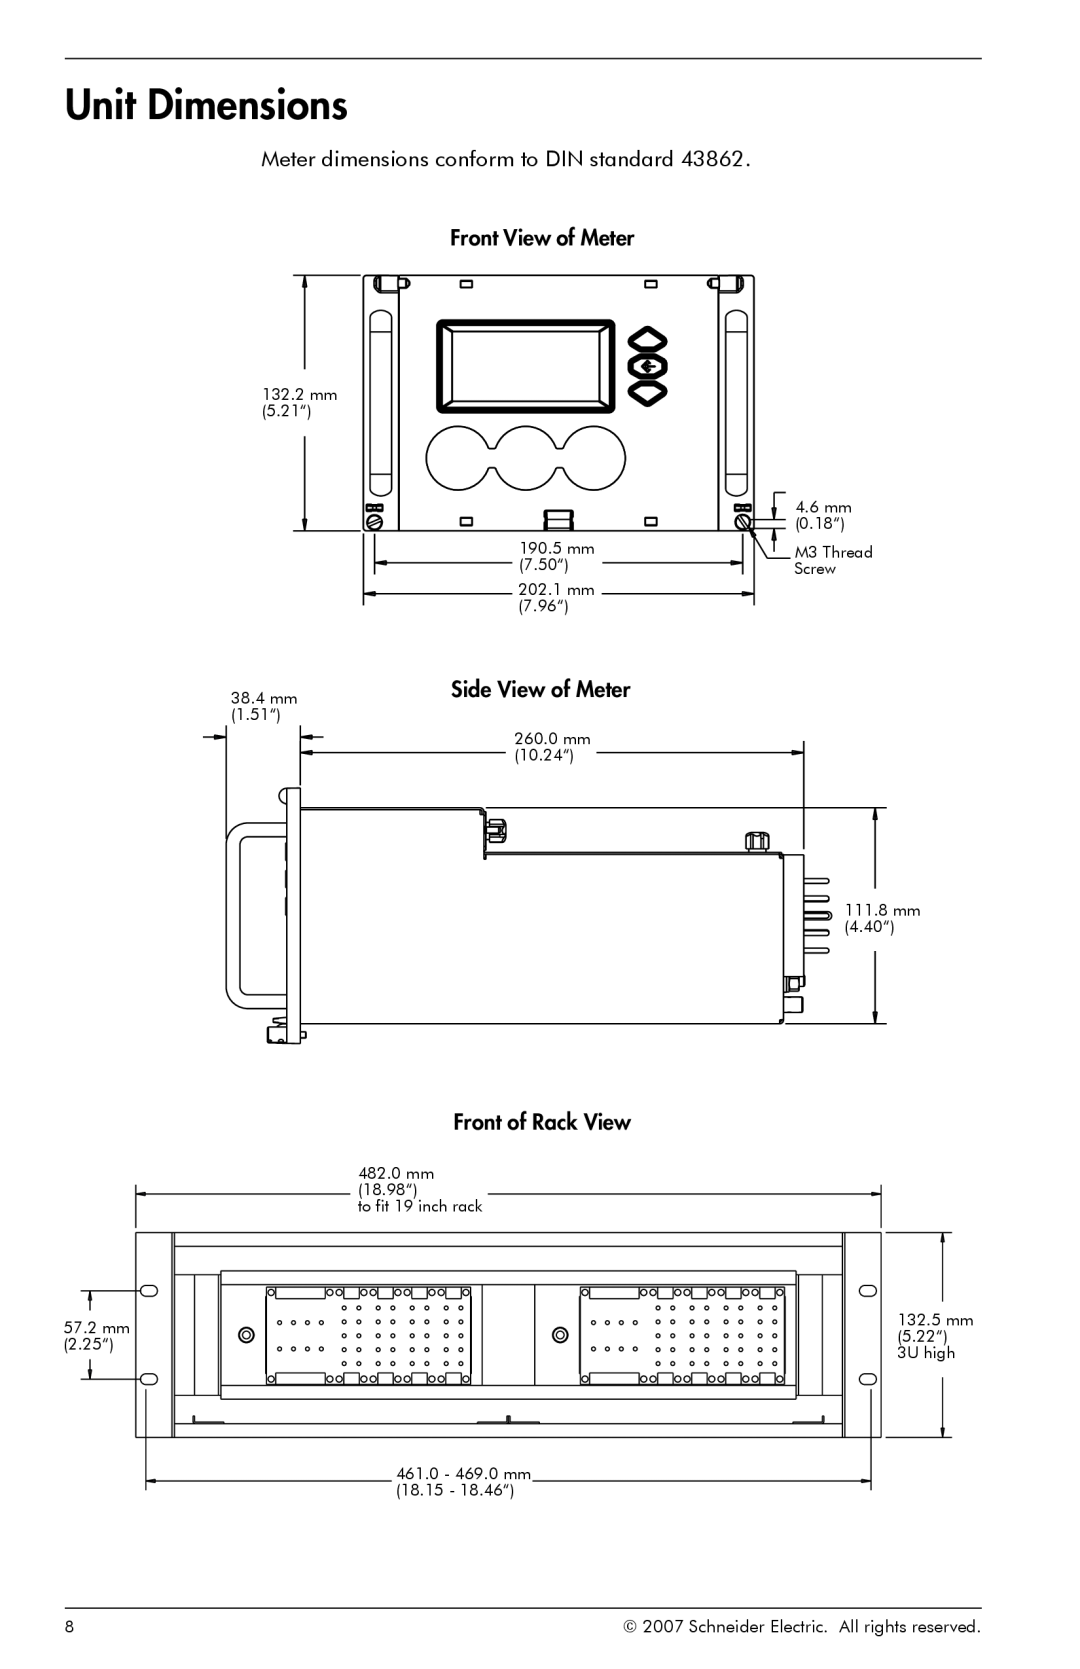 Schneider Electric ION8800 manual Unit Dimensions, Meter dimensions conform to DIN standard Front View of Meter 